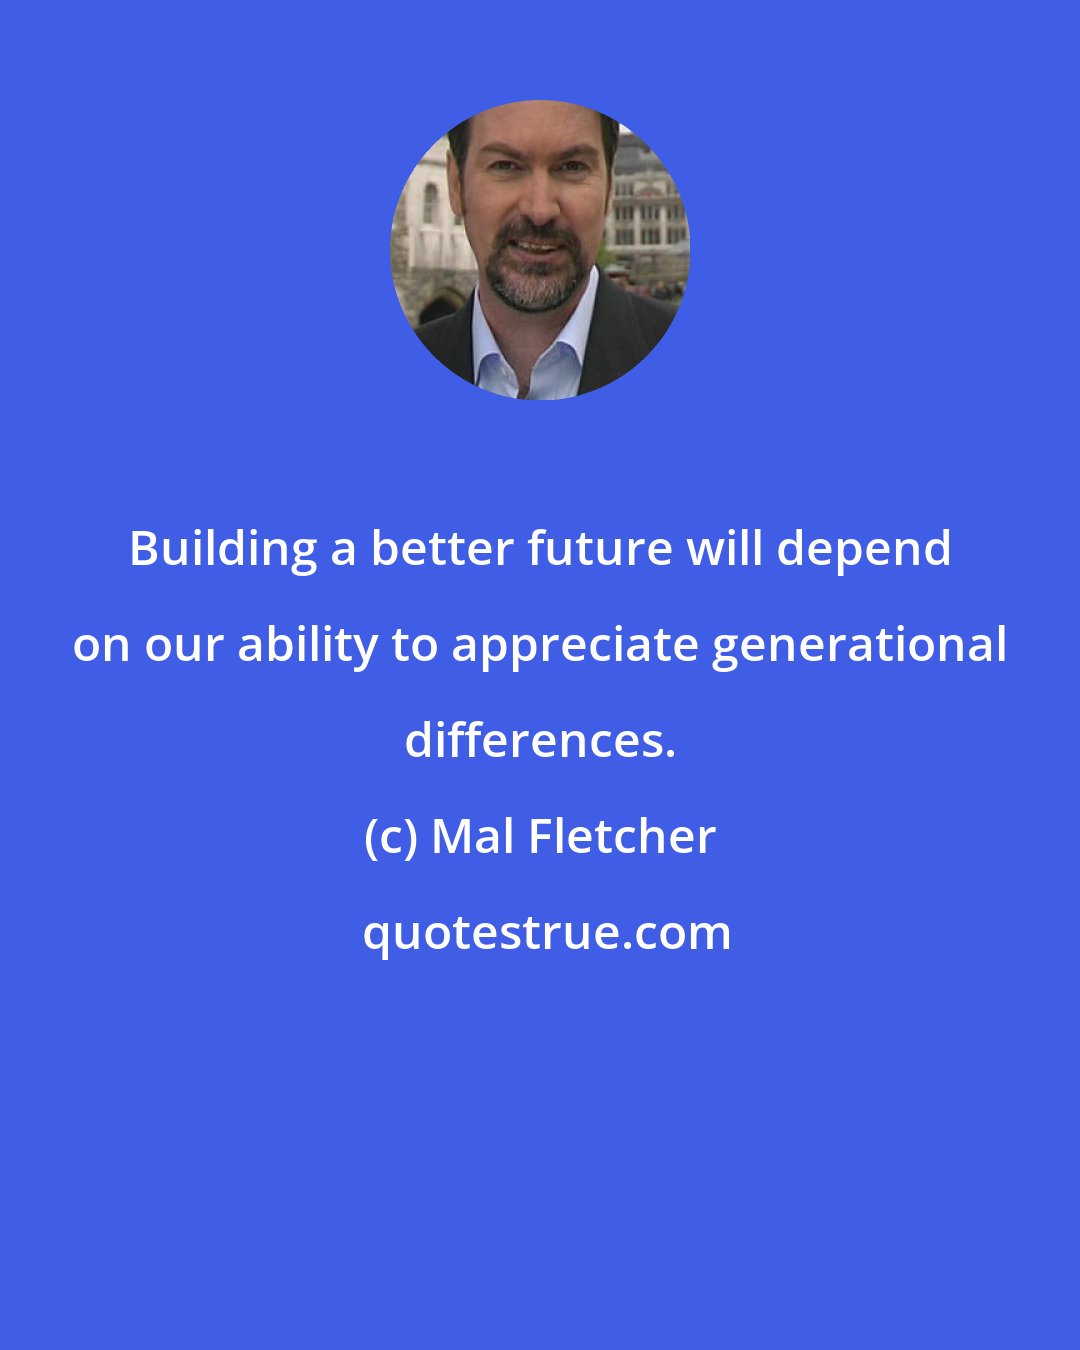 Mal Fletcher: Building a better future will depend on our ability to appreciate generational differences.